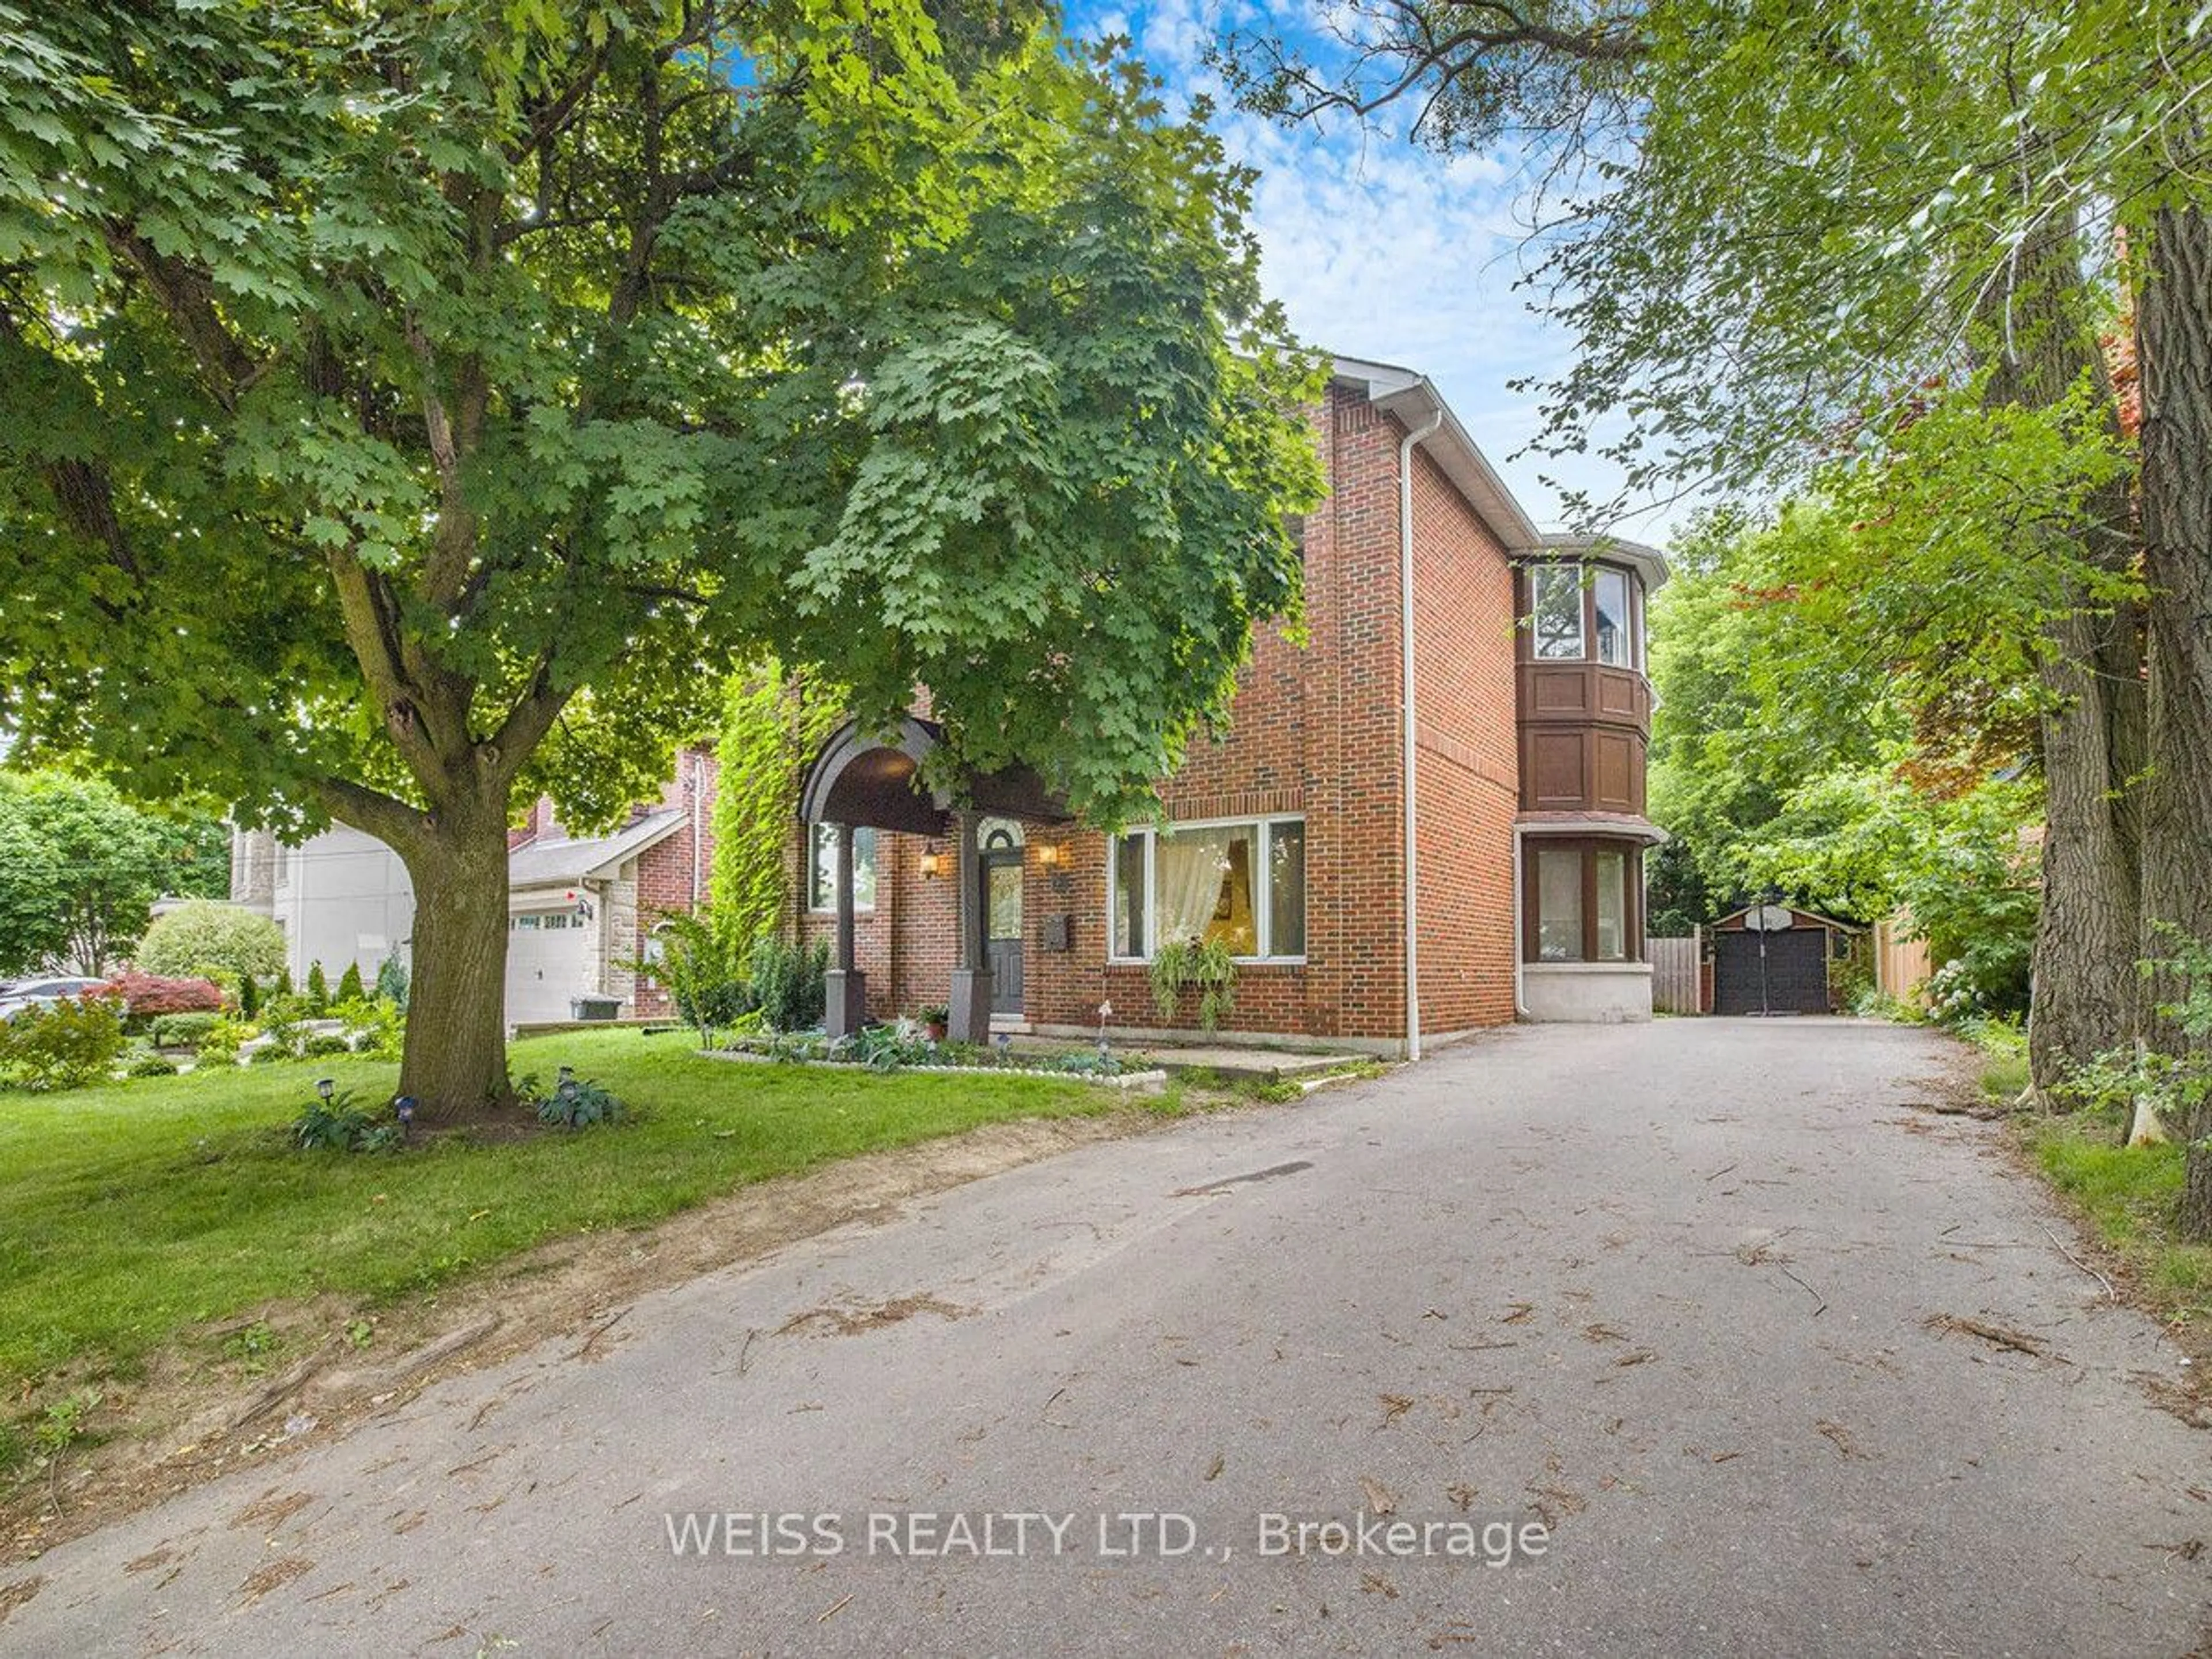 Frontside or backside of a home for 81 Brucewood Cres, Toronto Ontario M6A 2G9